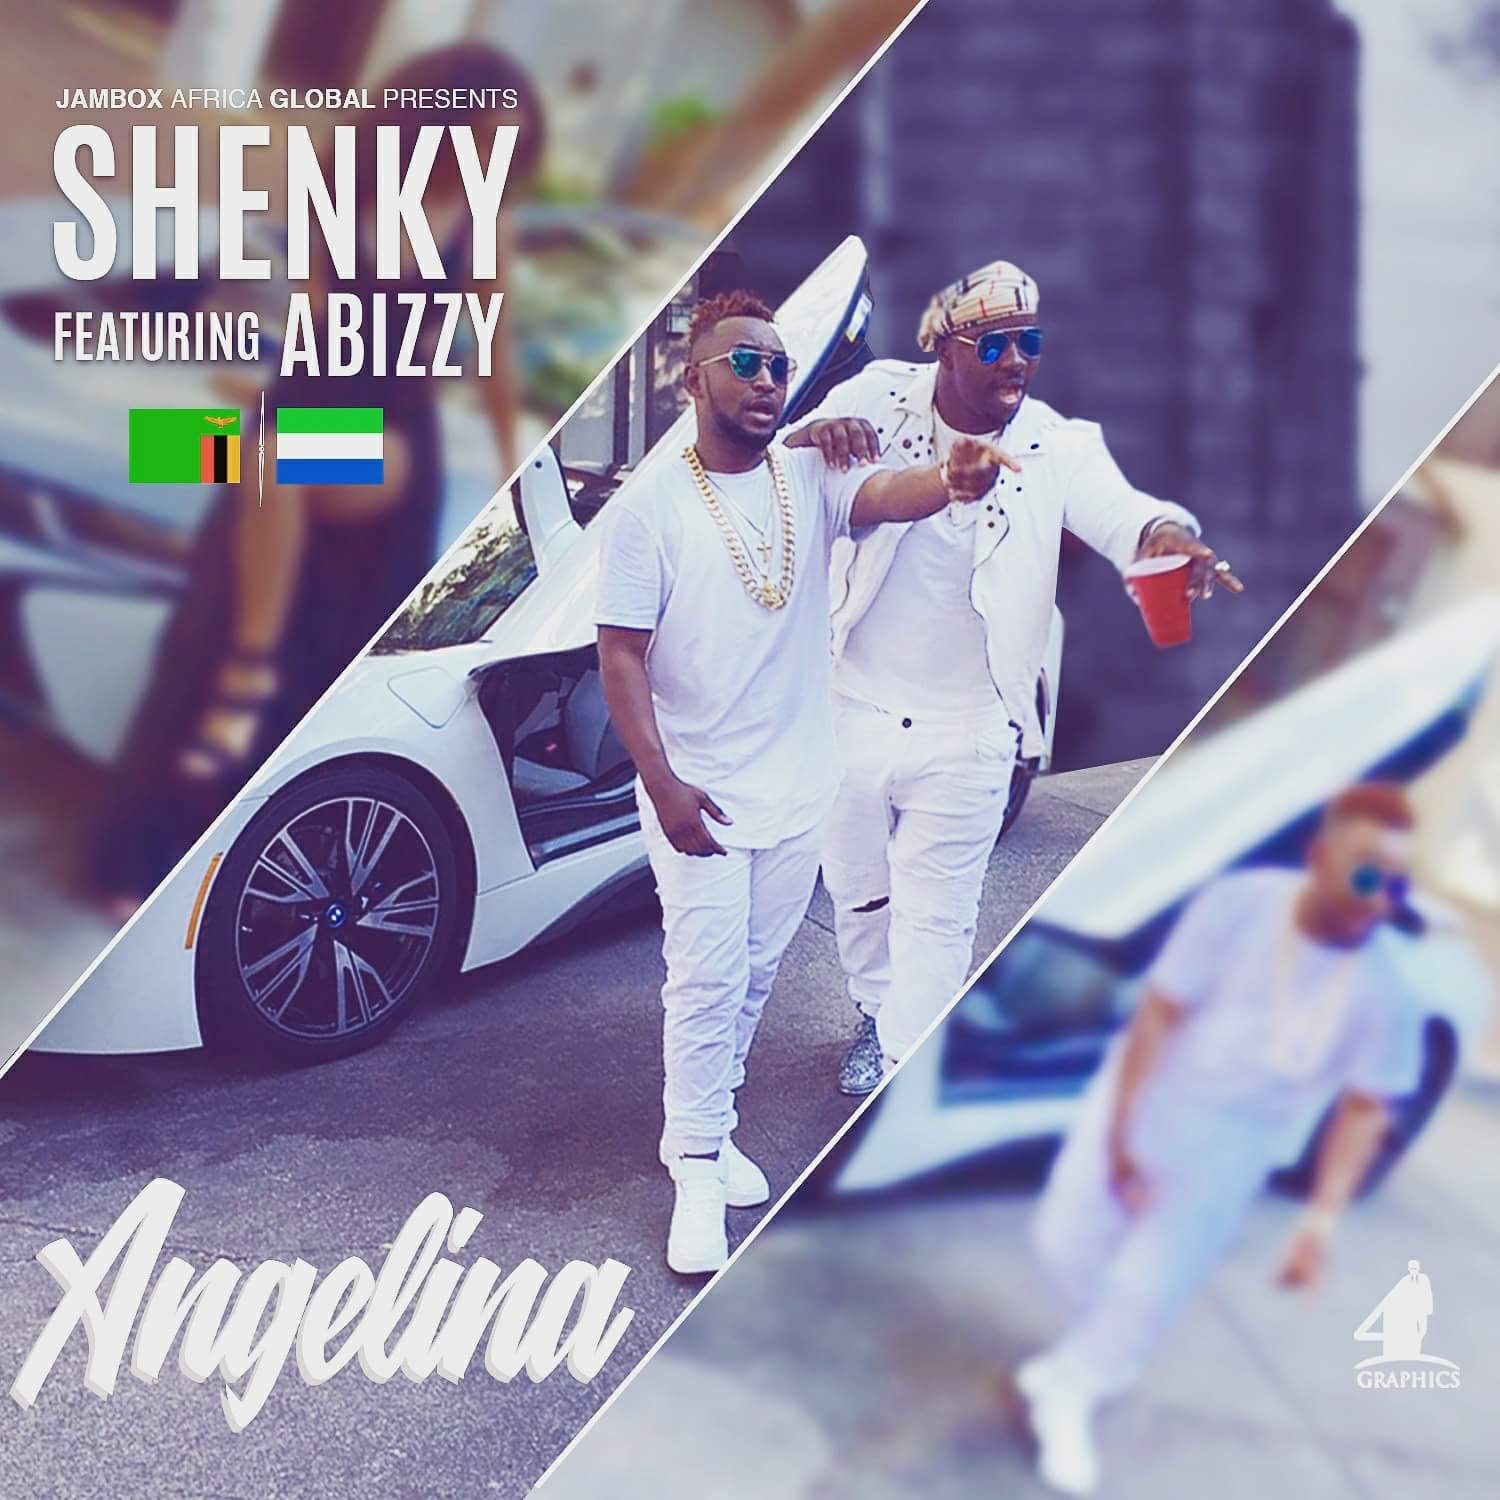 VIDEO |+MP3: Shenky - "Angelina" ft. Abizzy